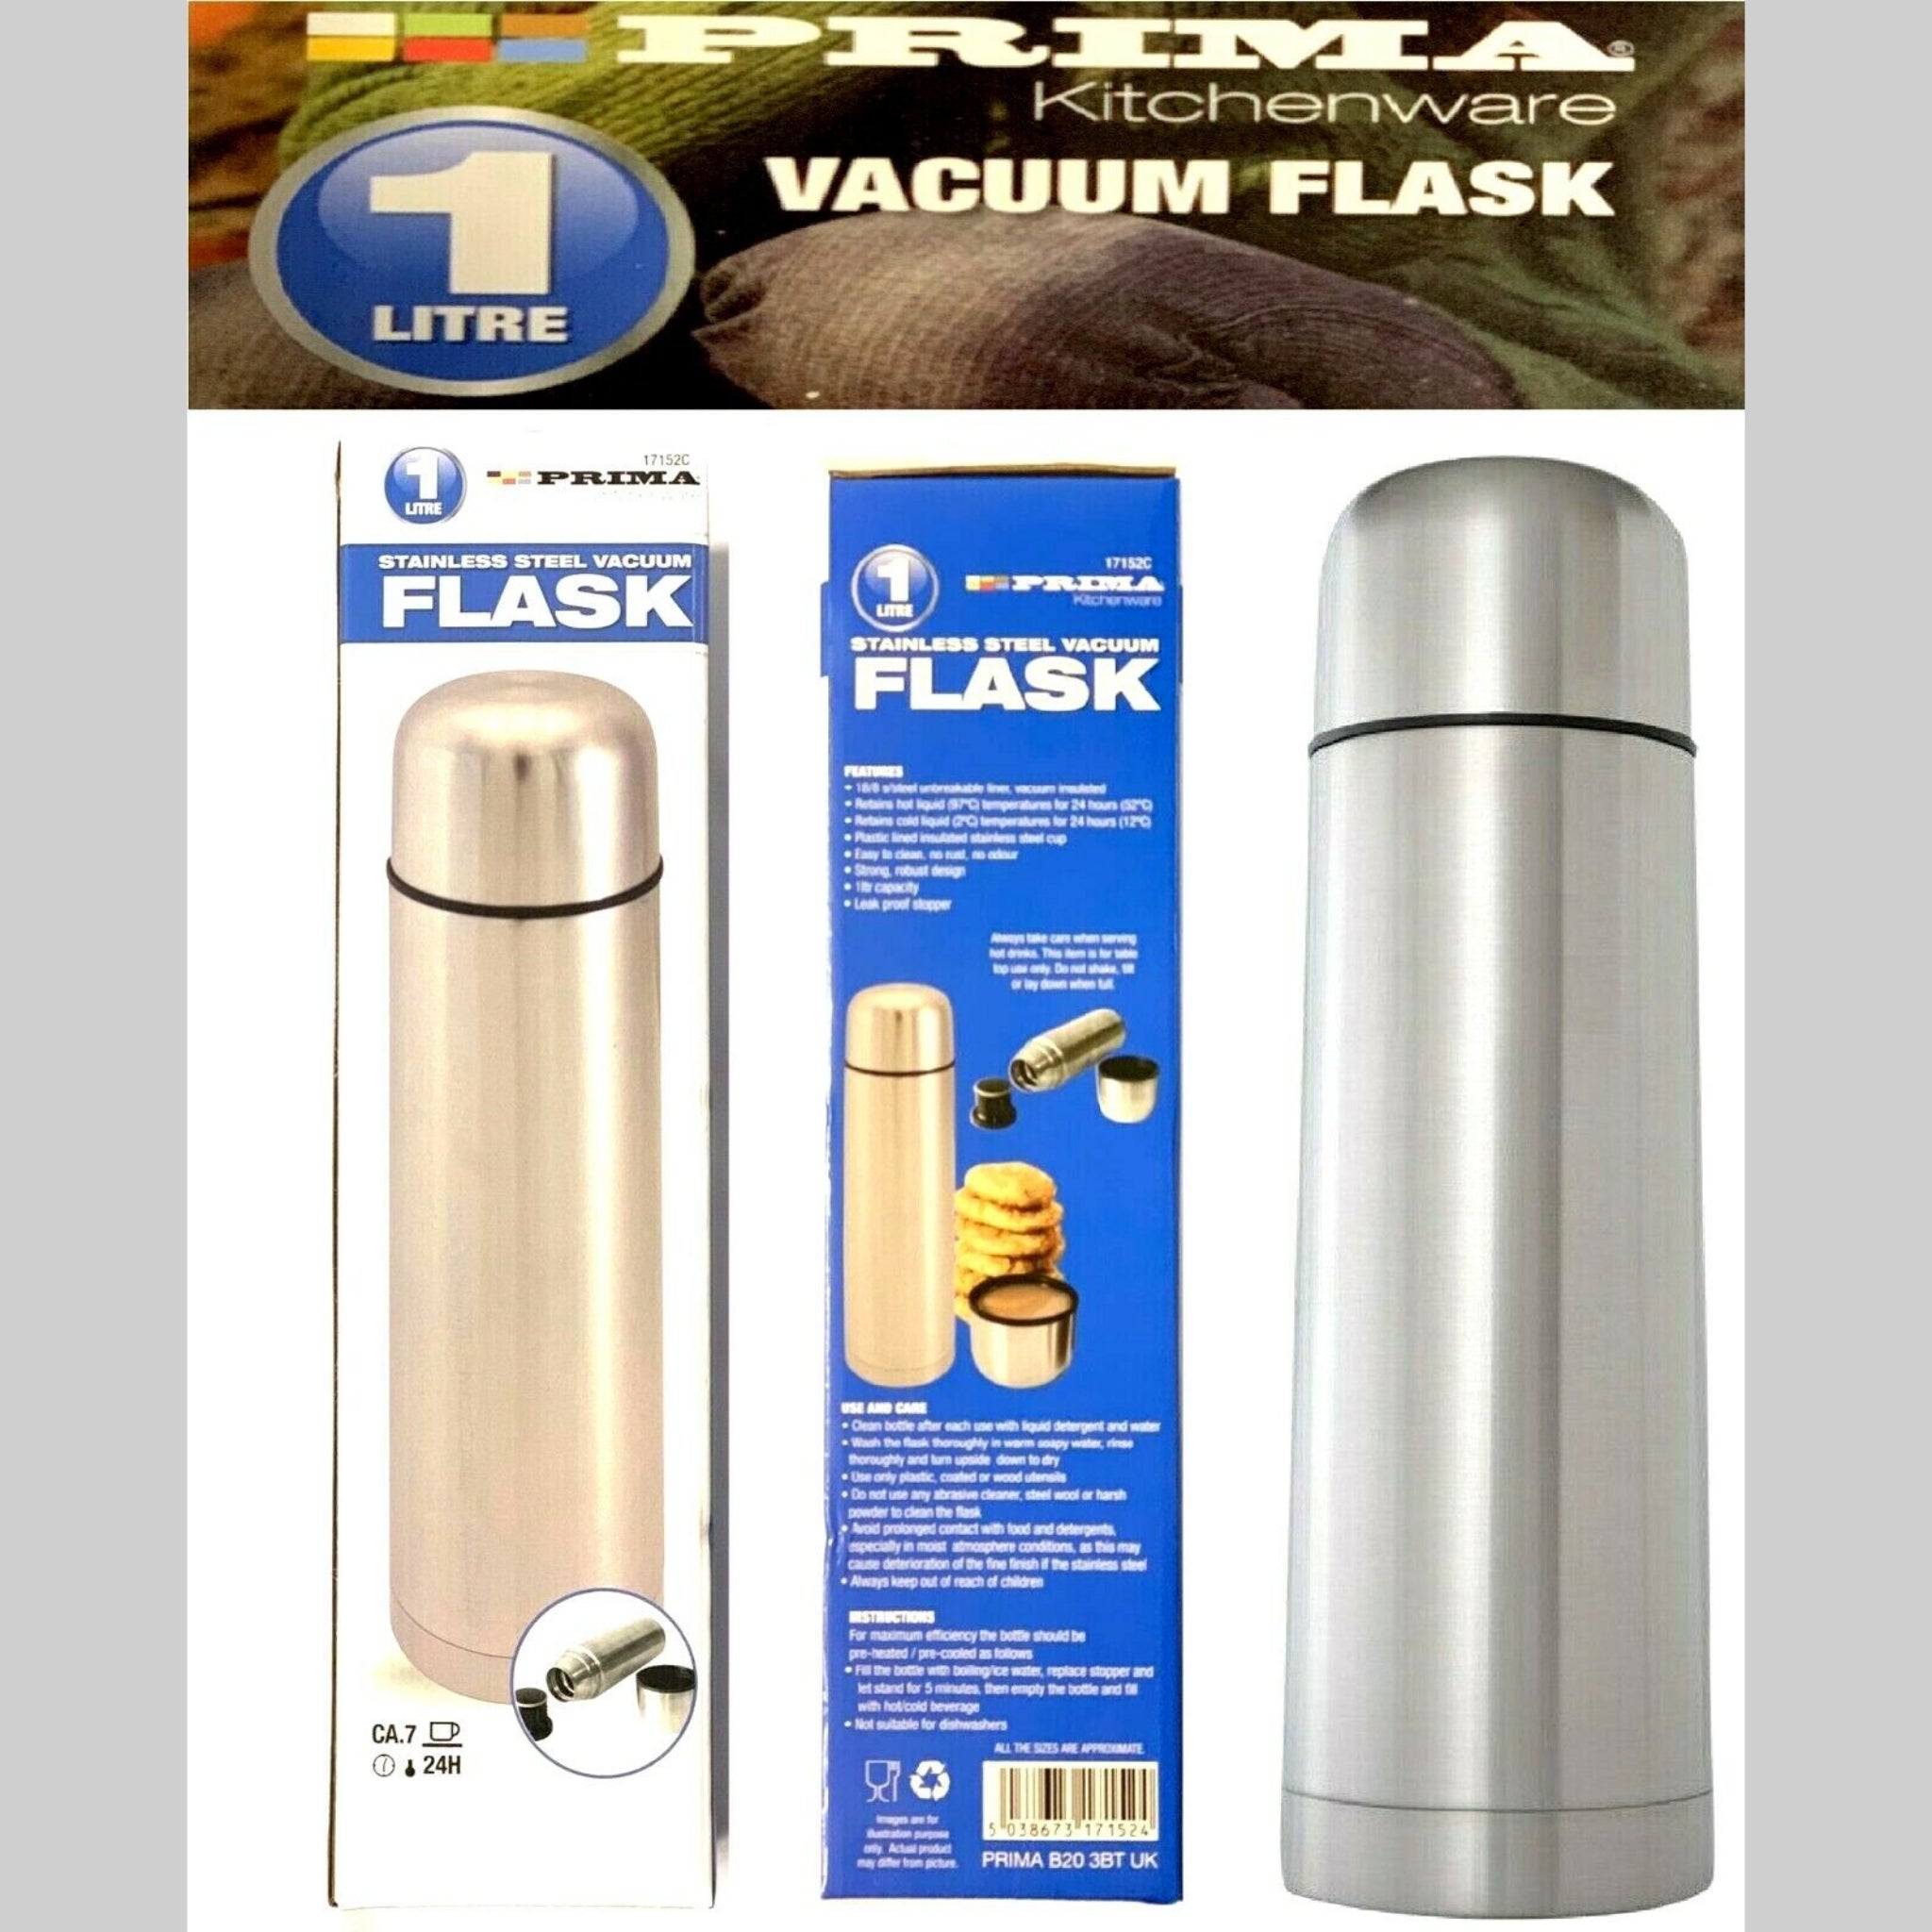 Beclen Harp 1000ML Stainless Steel Bullet Vaccum Insulated Hot And Cold  Thermos/Flask/Bottle With Push Button, Best Vaccum Flask, Thermos Vaccum  Flask, Vaccum Flask Bottle, Cup, Mug, High Quality, Premium Quality